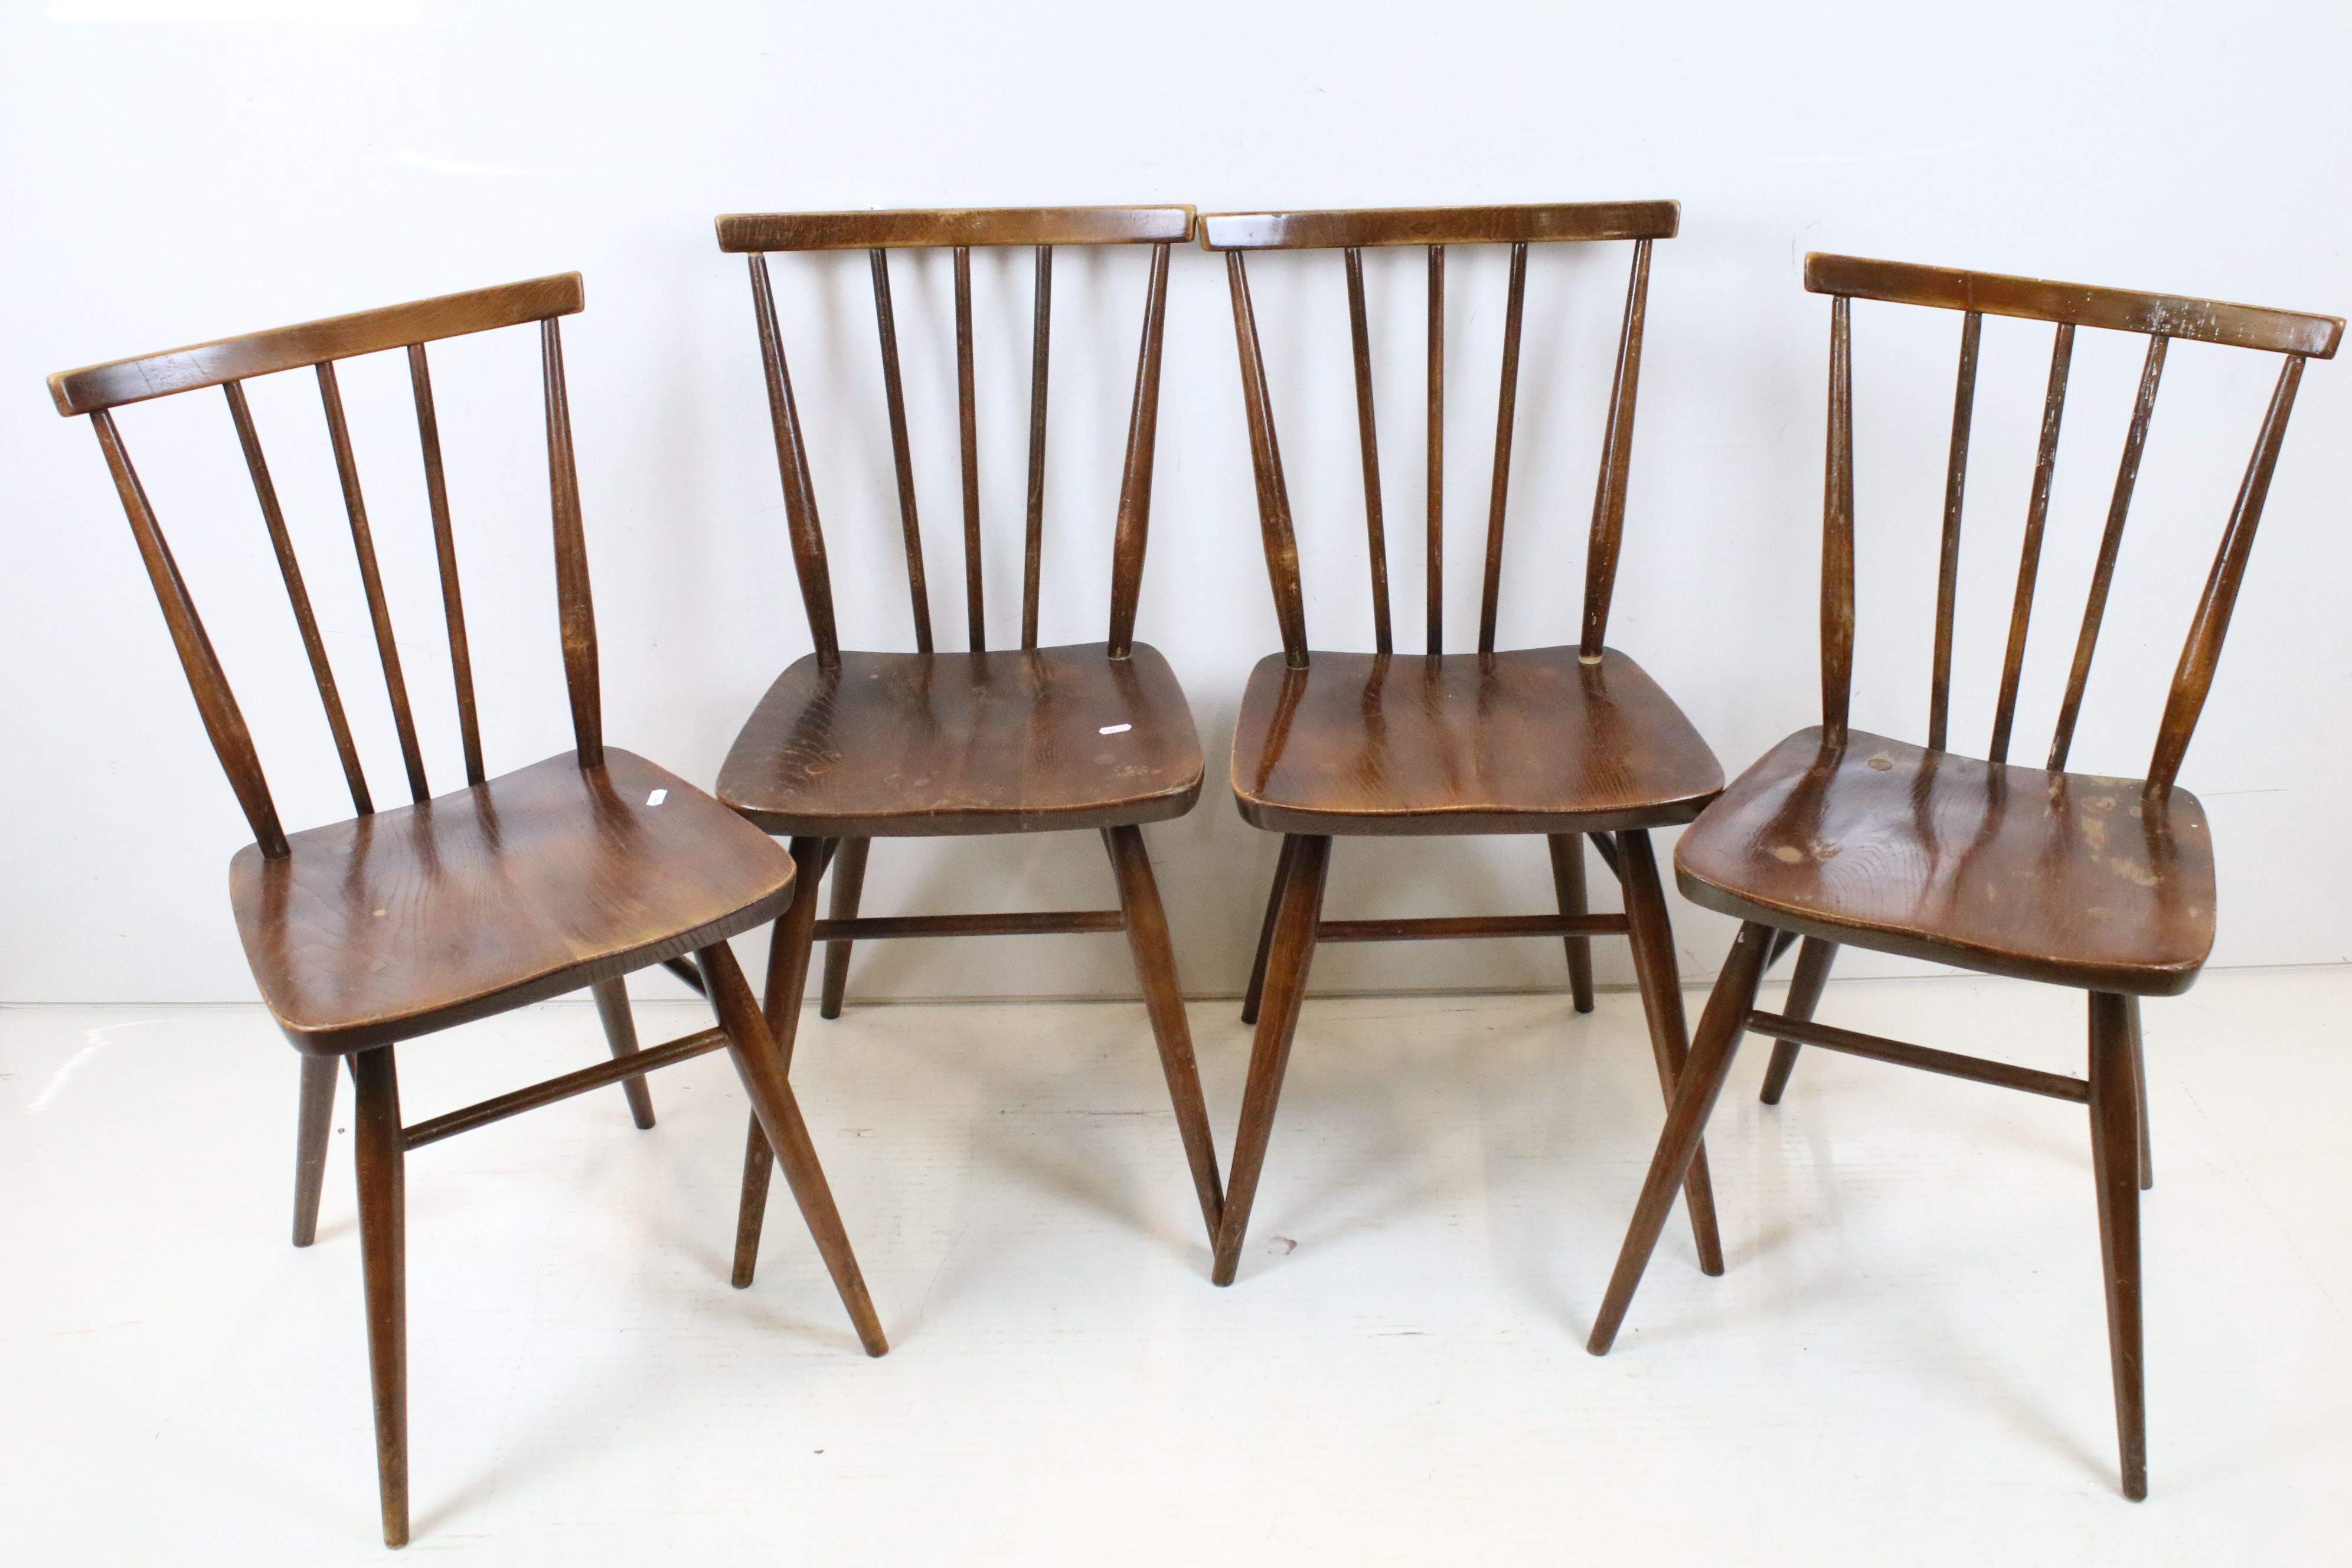 Set of Four Ercol Elm and Beech Dining Chairs, model 391, each chair 77cm high x 40cm wide